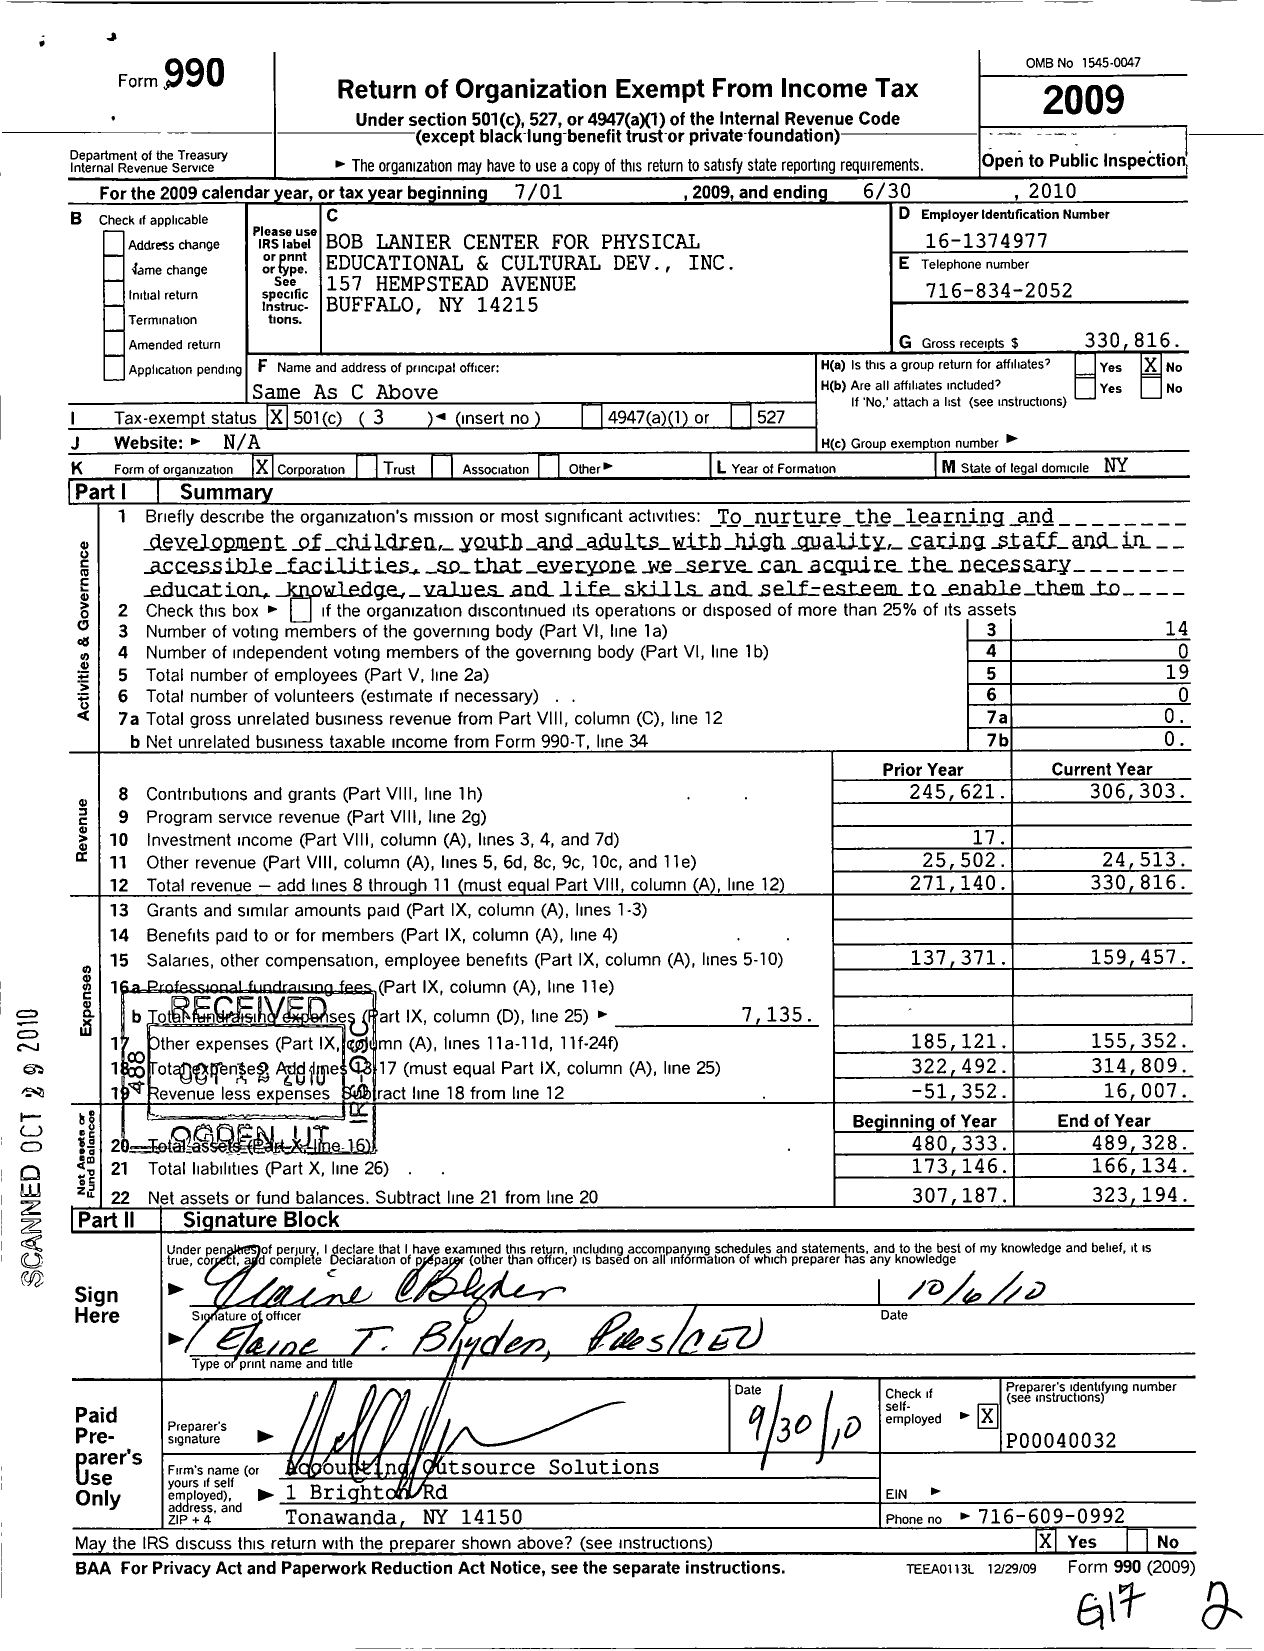 Image of first page of 2009 Form 990 for Bob Lanier Center for Educational Physical and Cultural Development